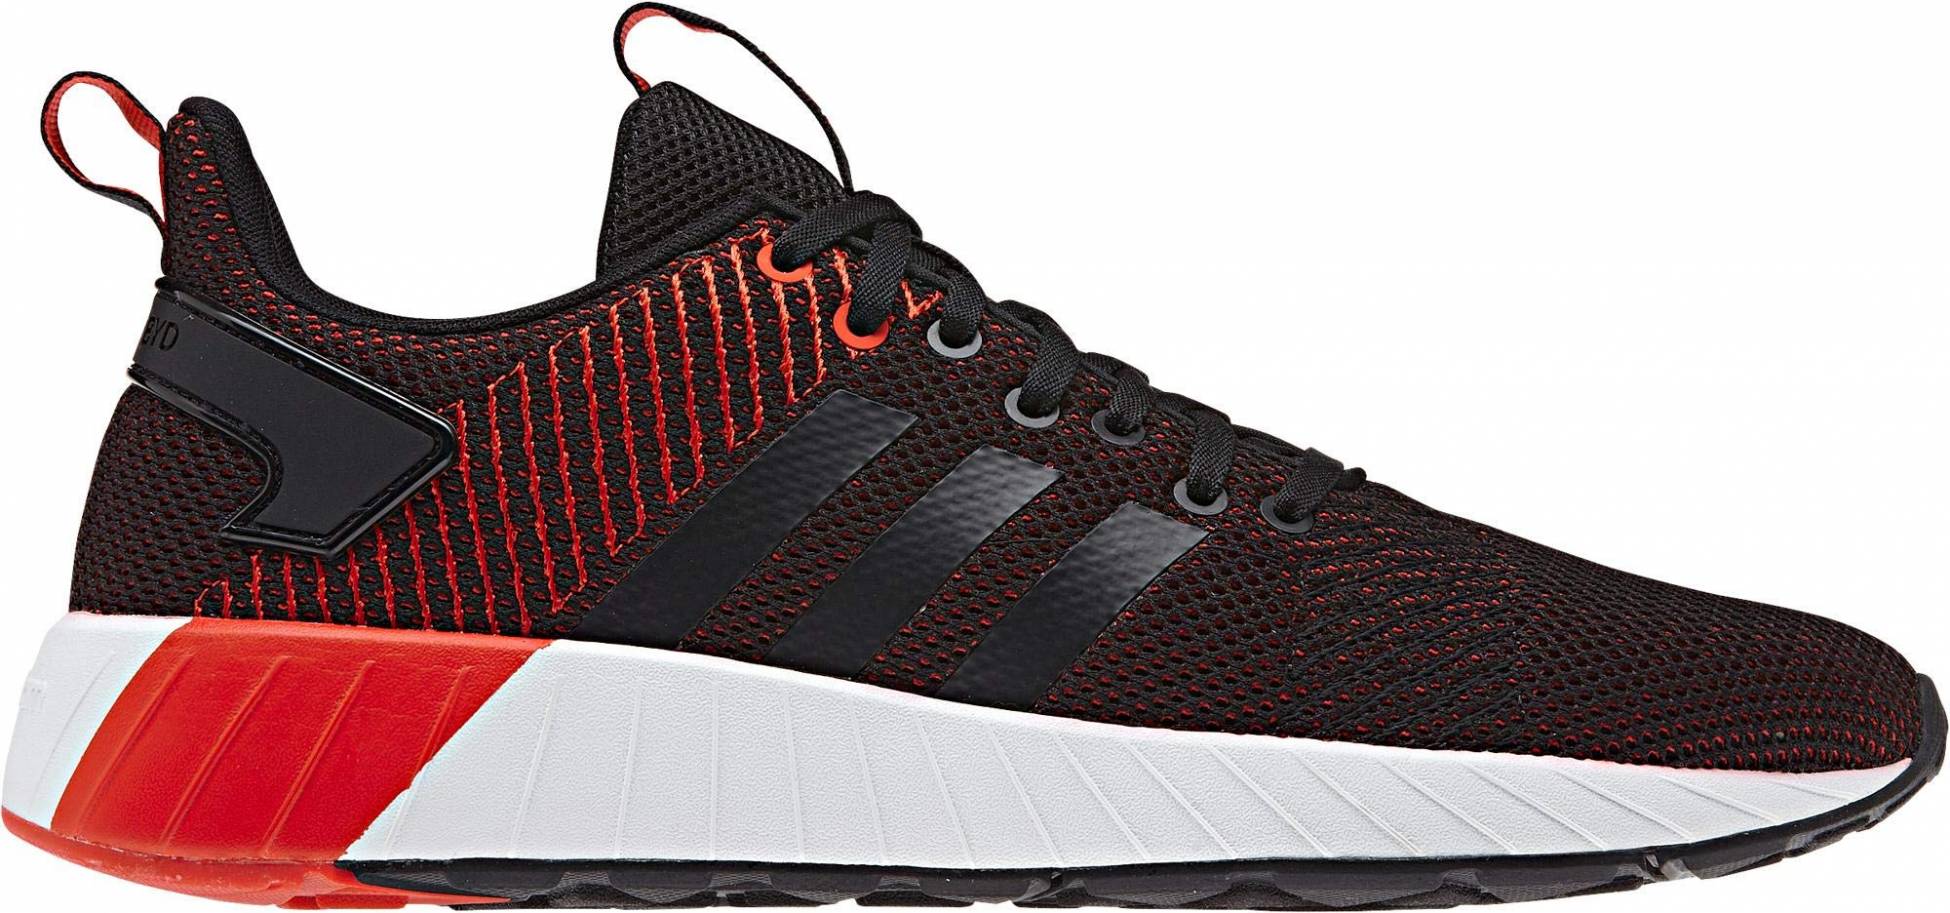 Adidas Questar BYD sneakers in 6 colors (only $60) | RunRepeat